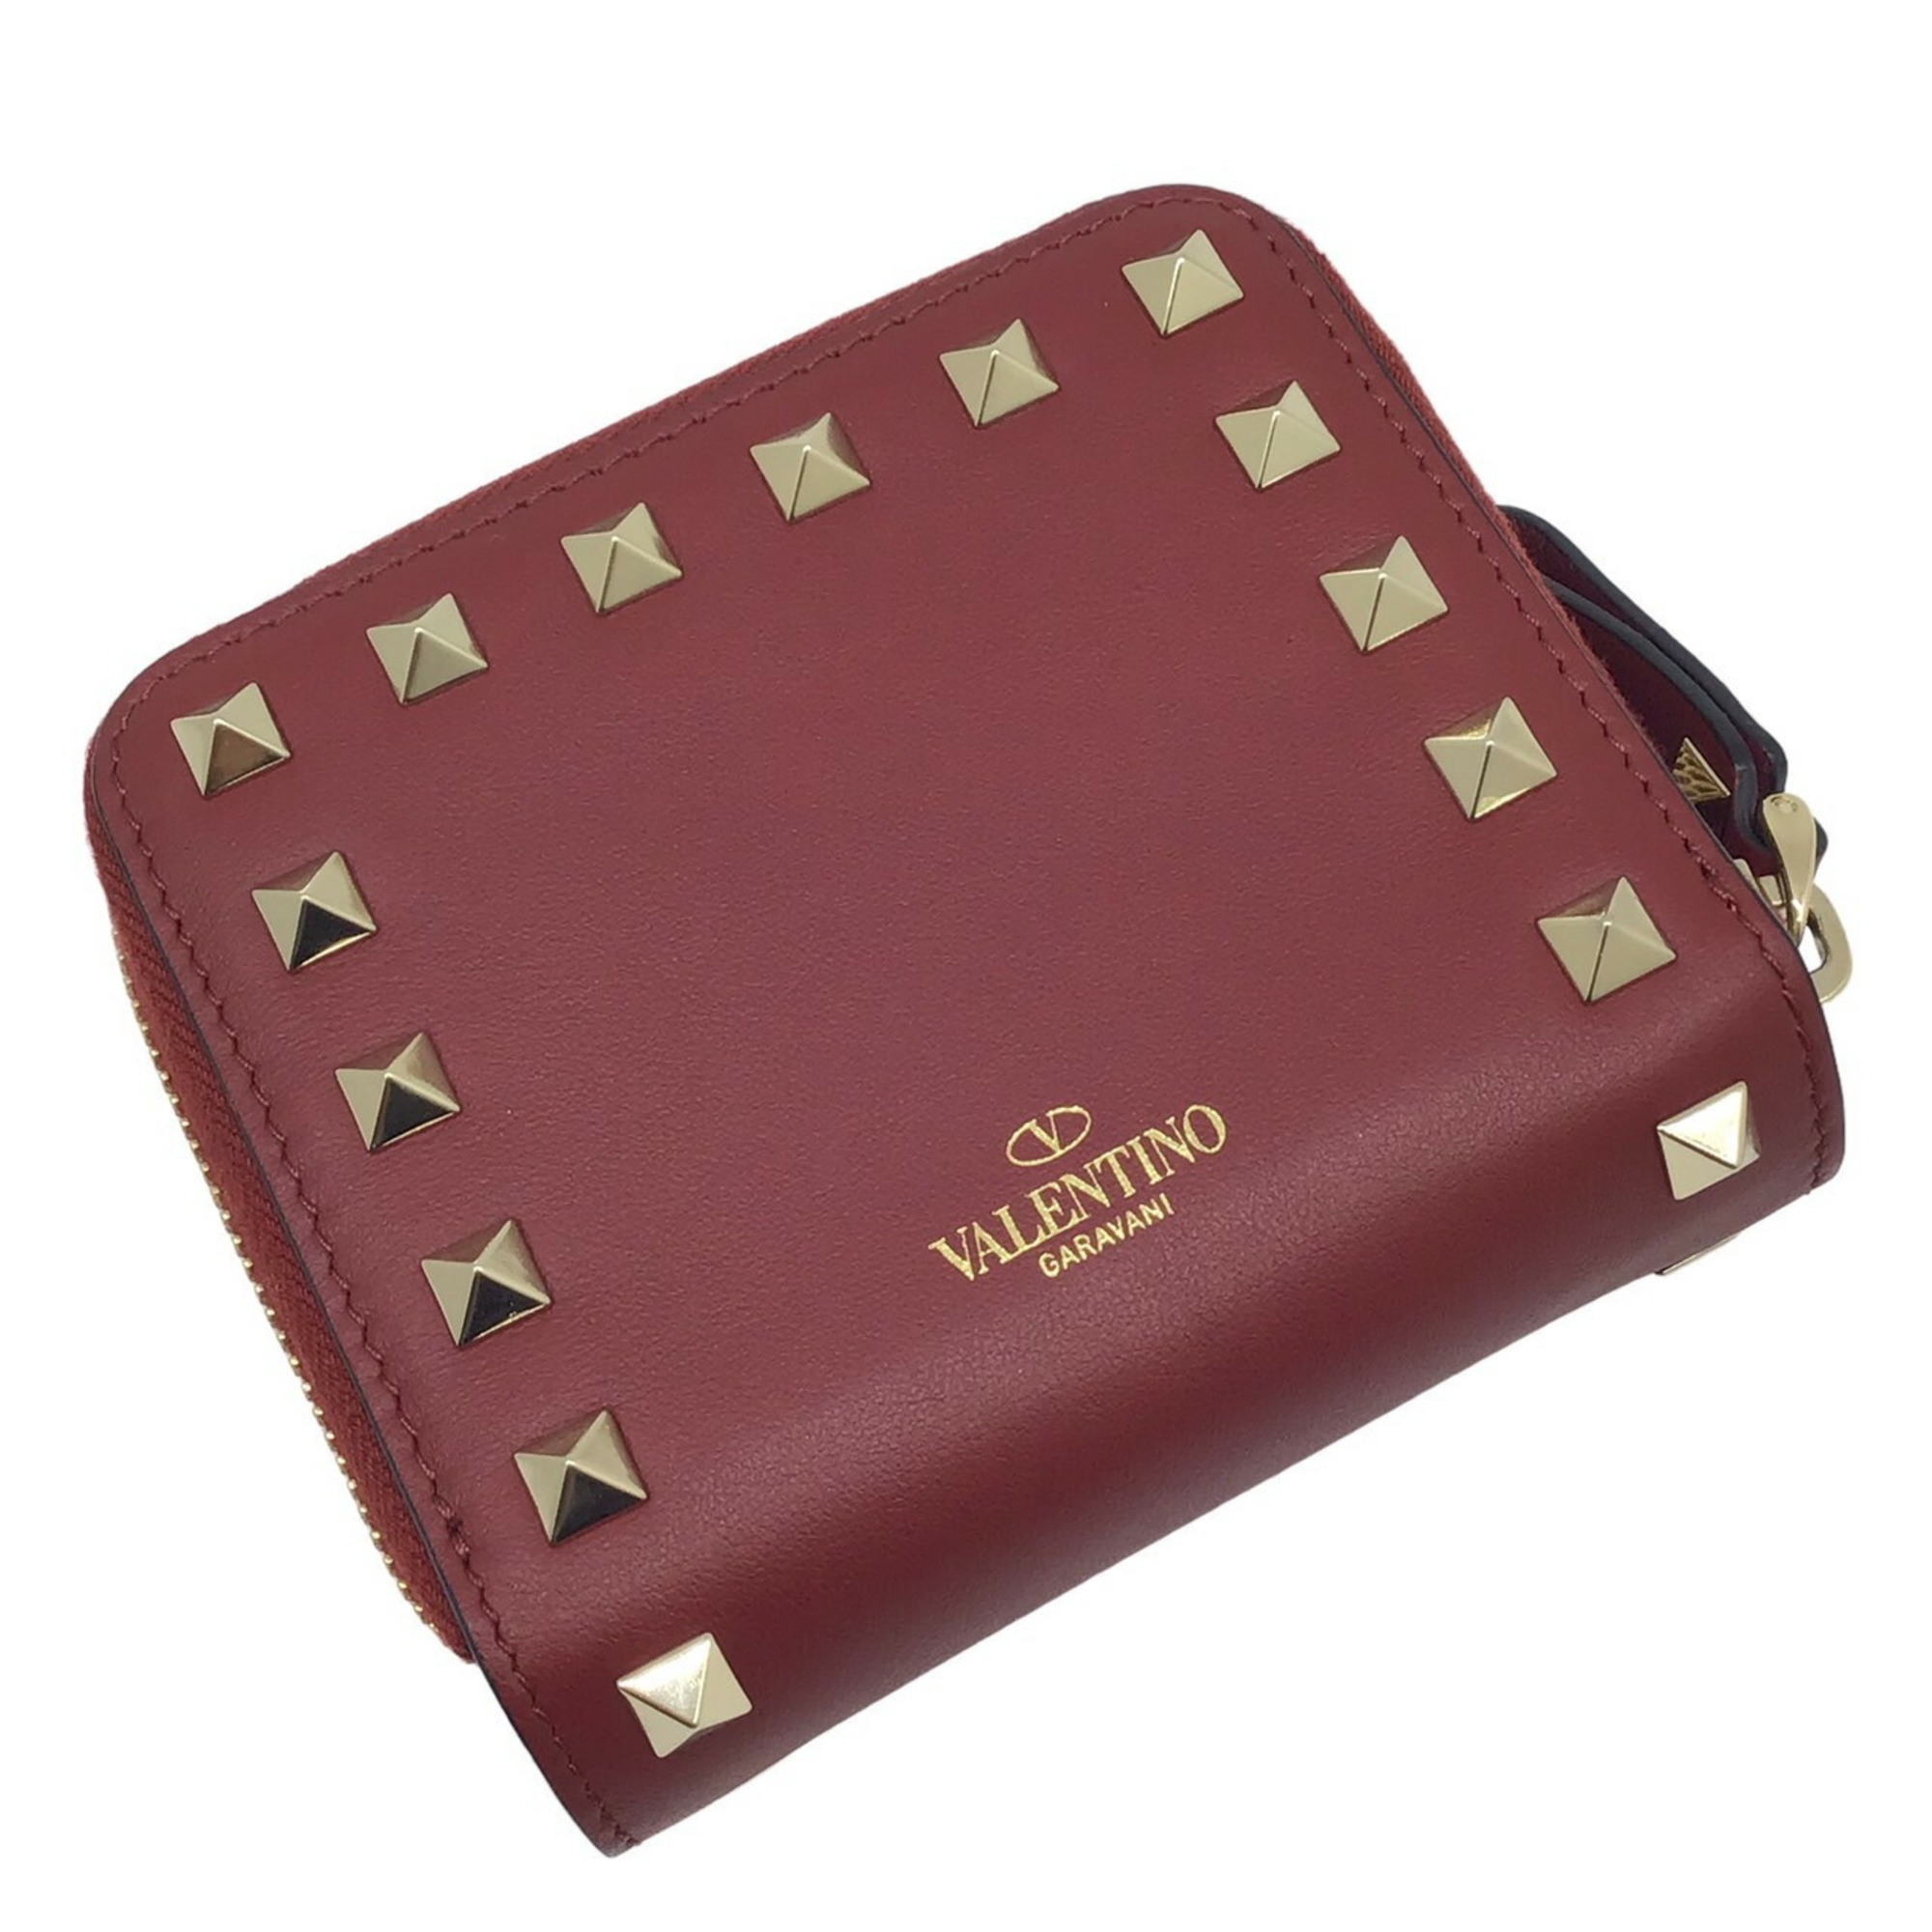 Valentino VALENTINO Bi-fold Wallet Rockstud Compact Leather Red QW2P0649 Gold Metal Fittings Women's